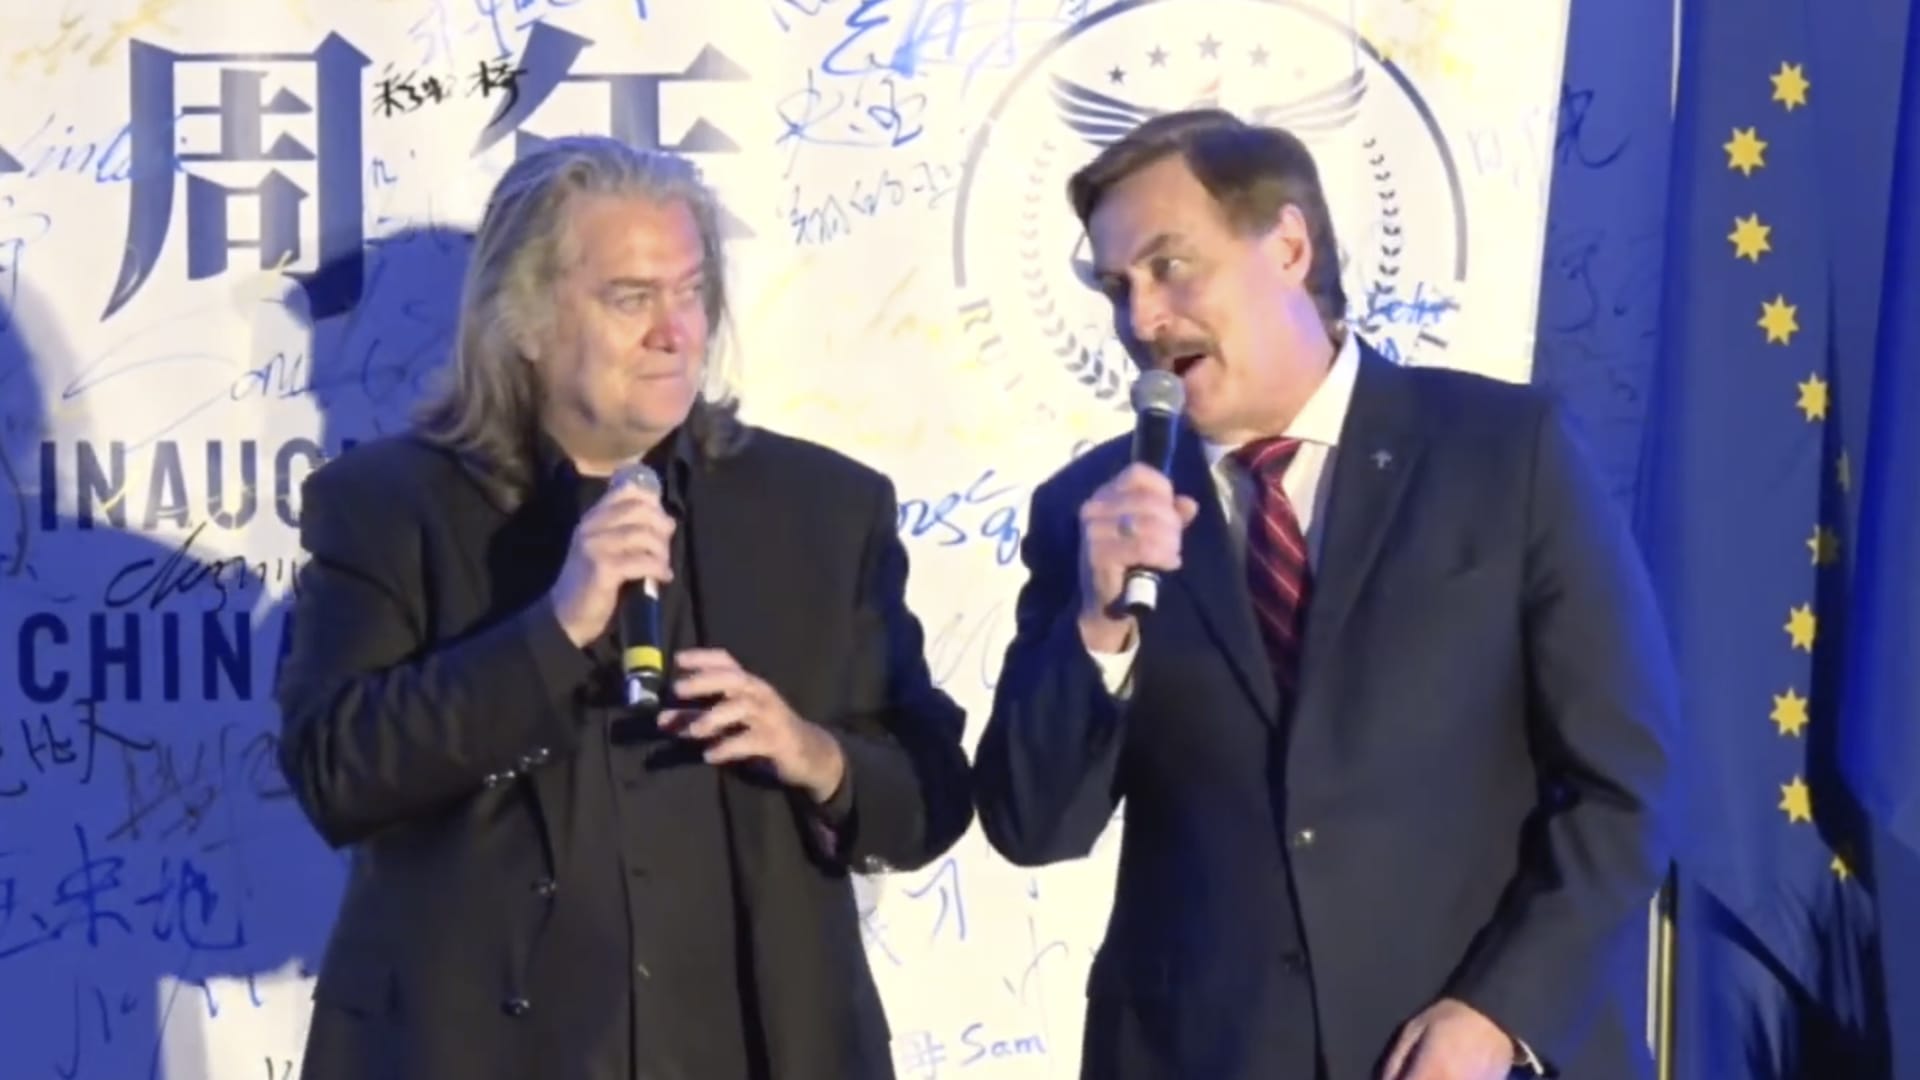 Steve Bannon and Mike Lindell speak at one year anniversary celebration of the New Federal State of China.